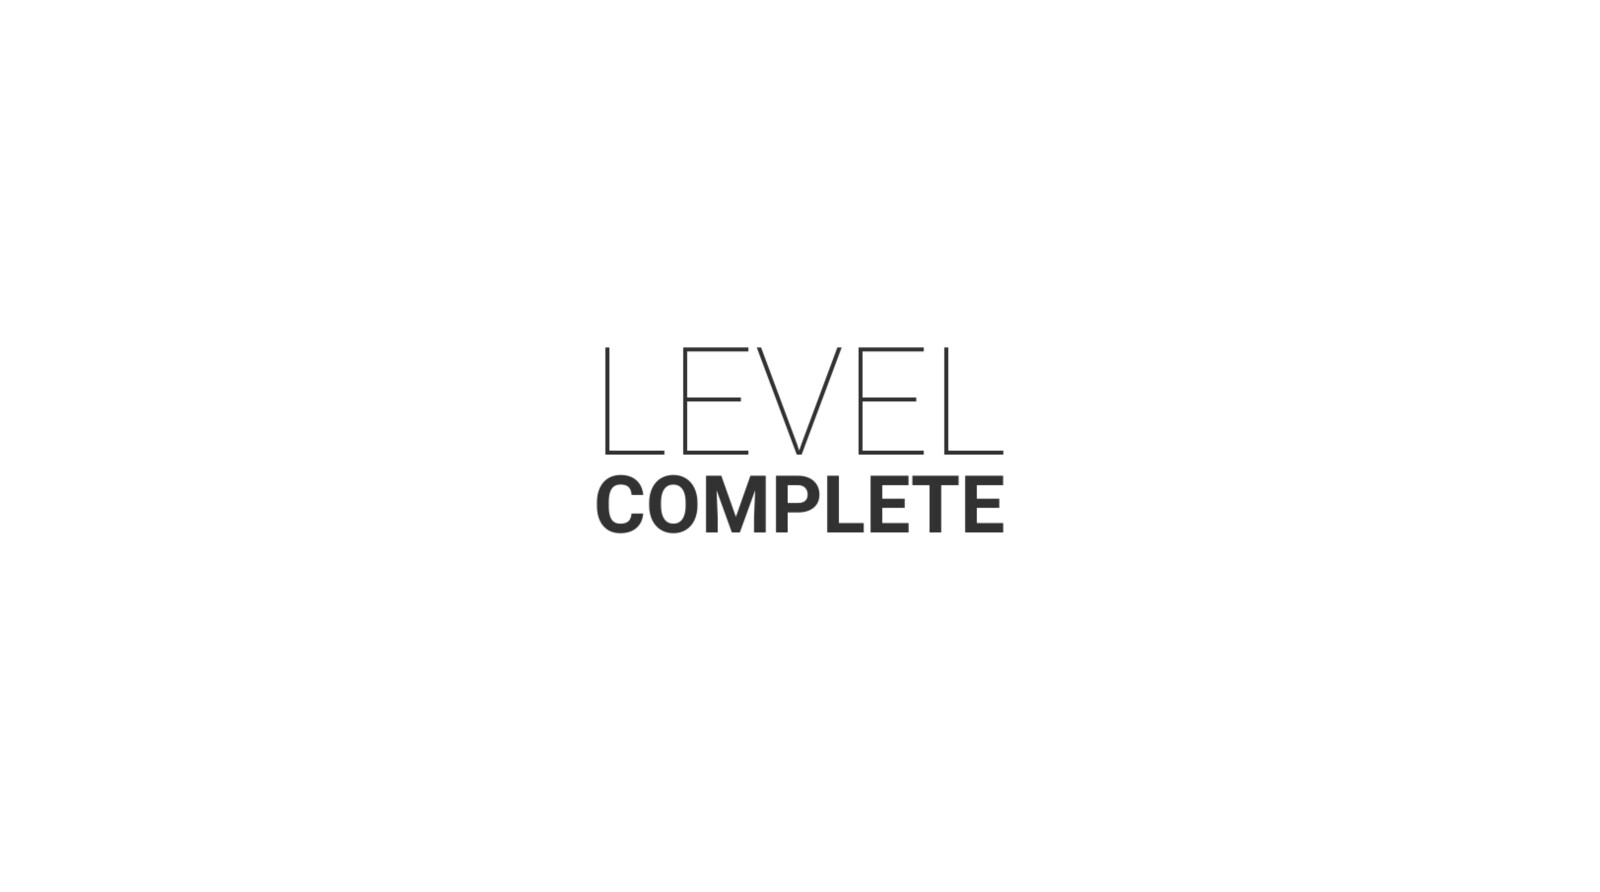 Level complete screen